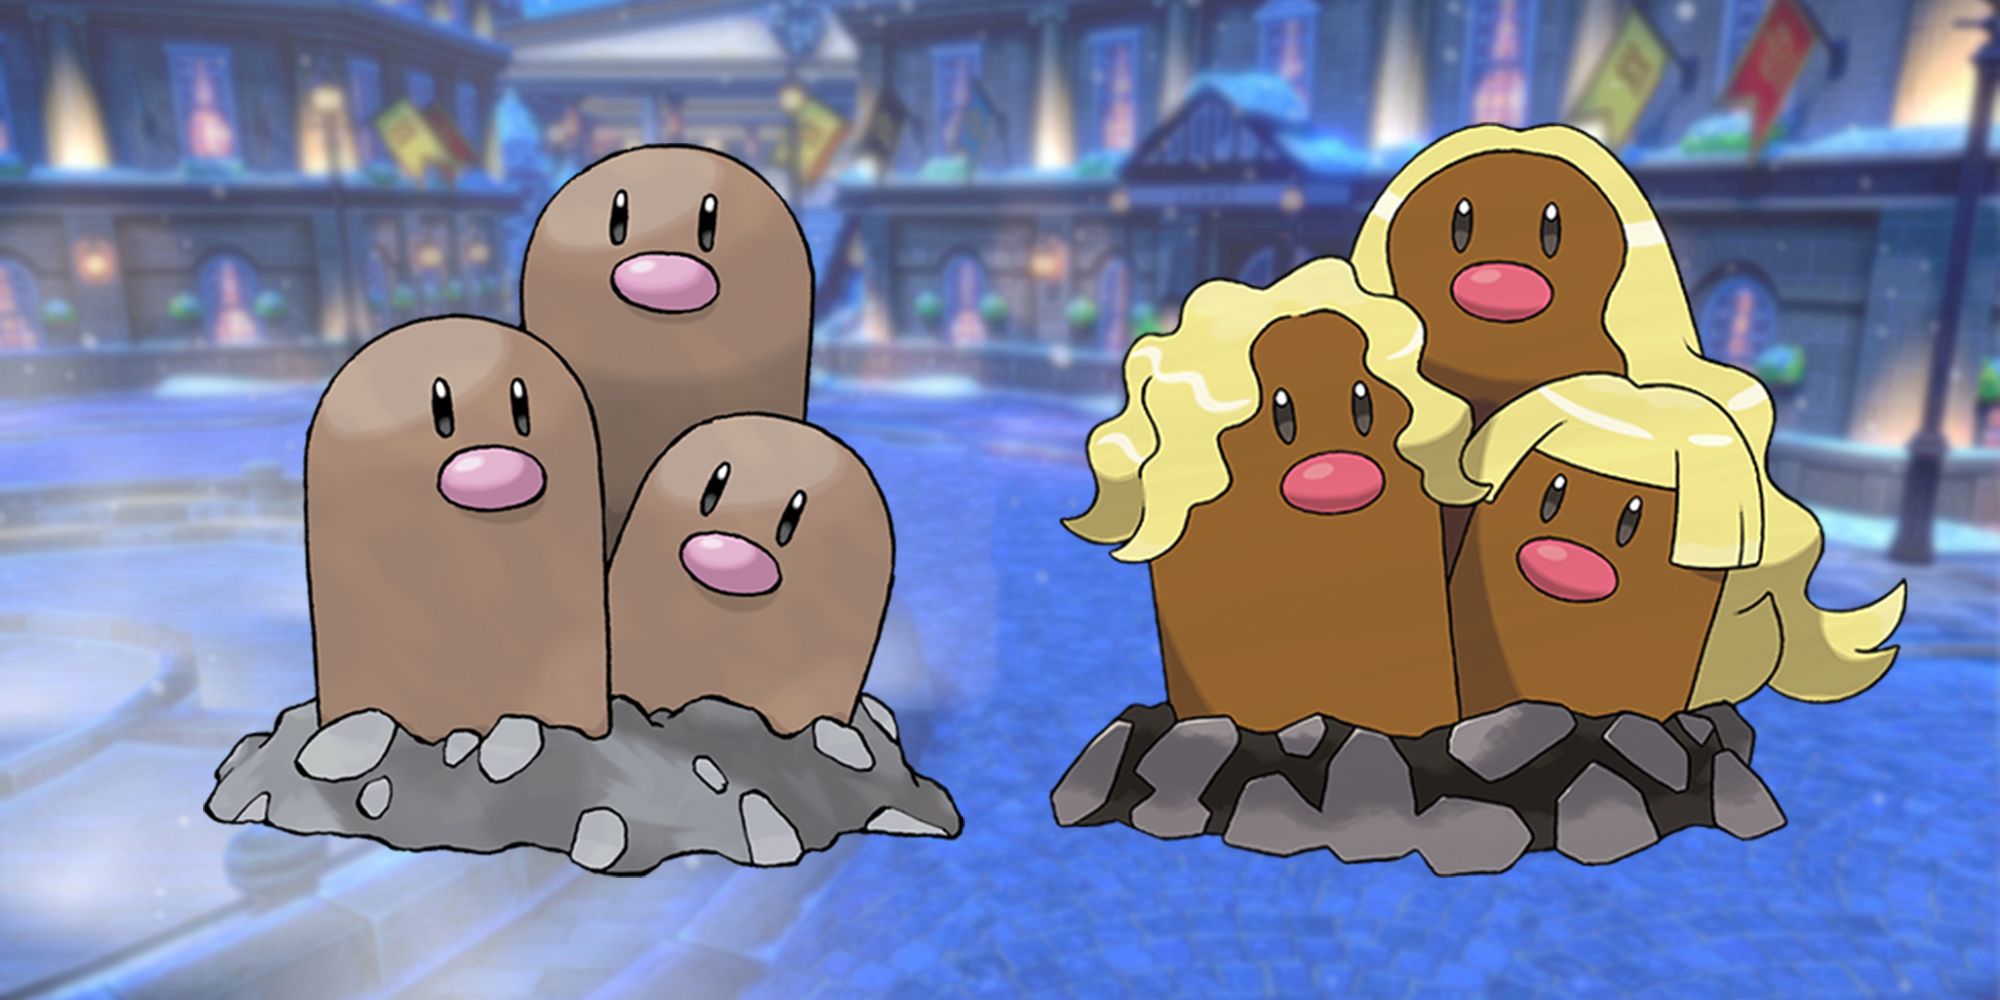 Pokemon Dugtrio and Alolan Dugtrio side by side